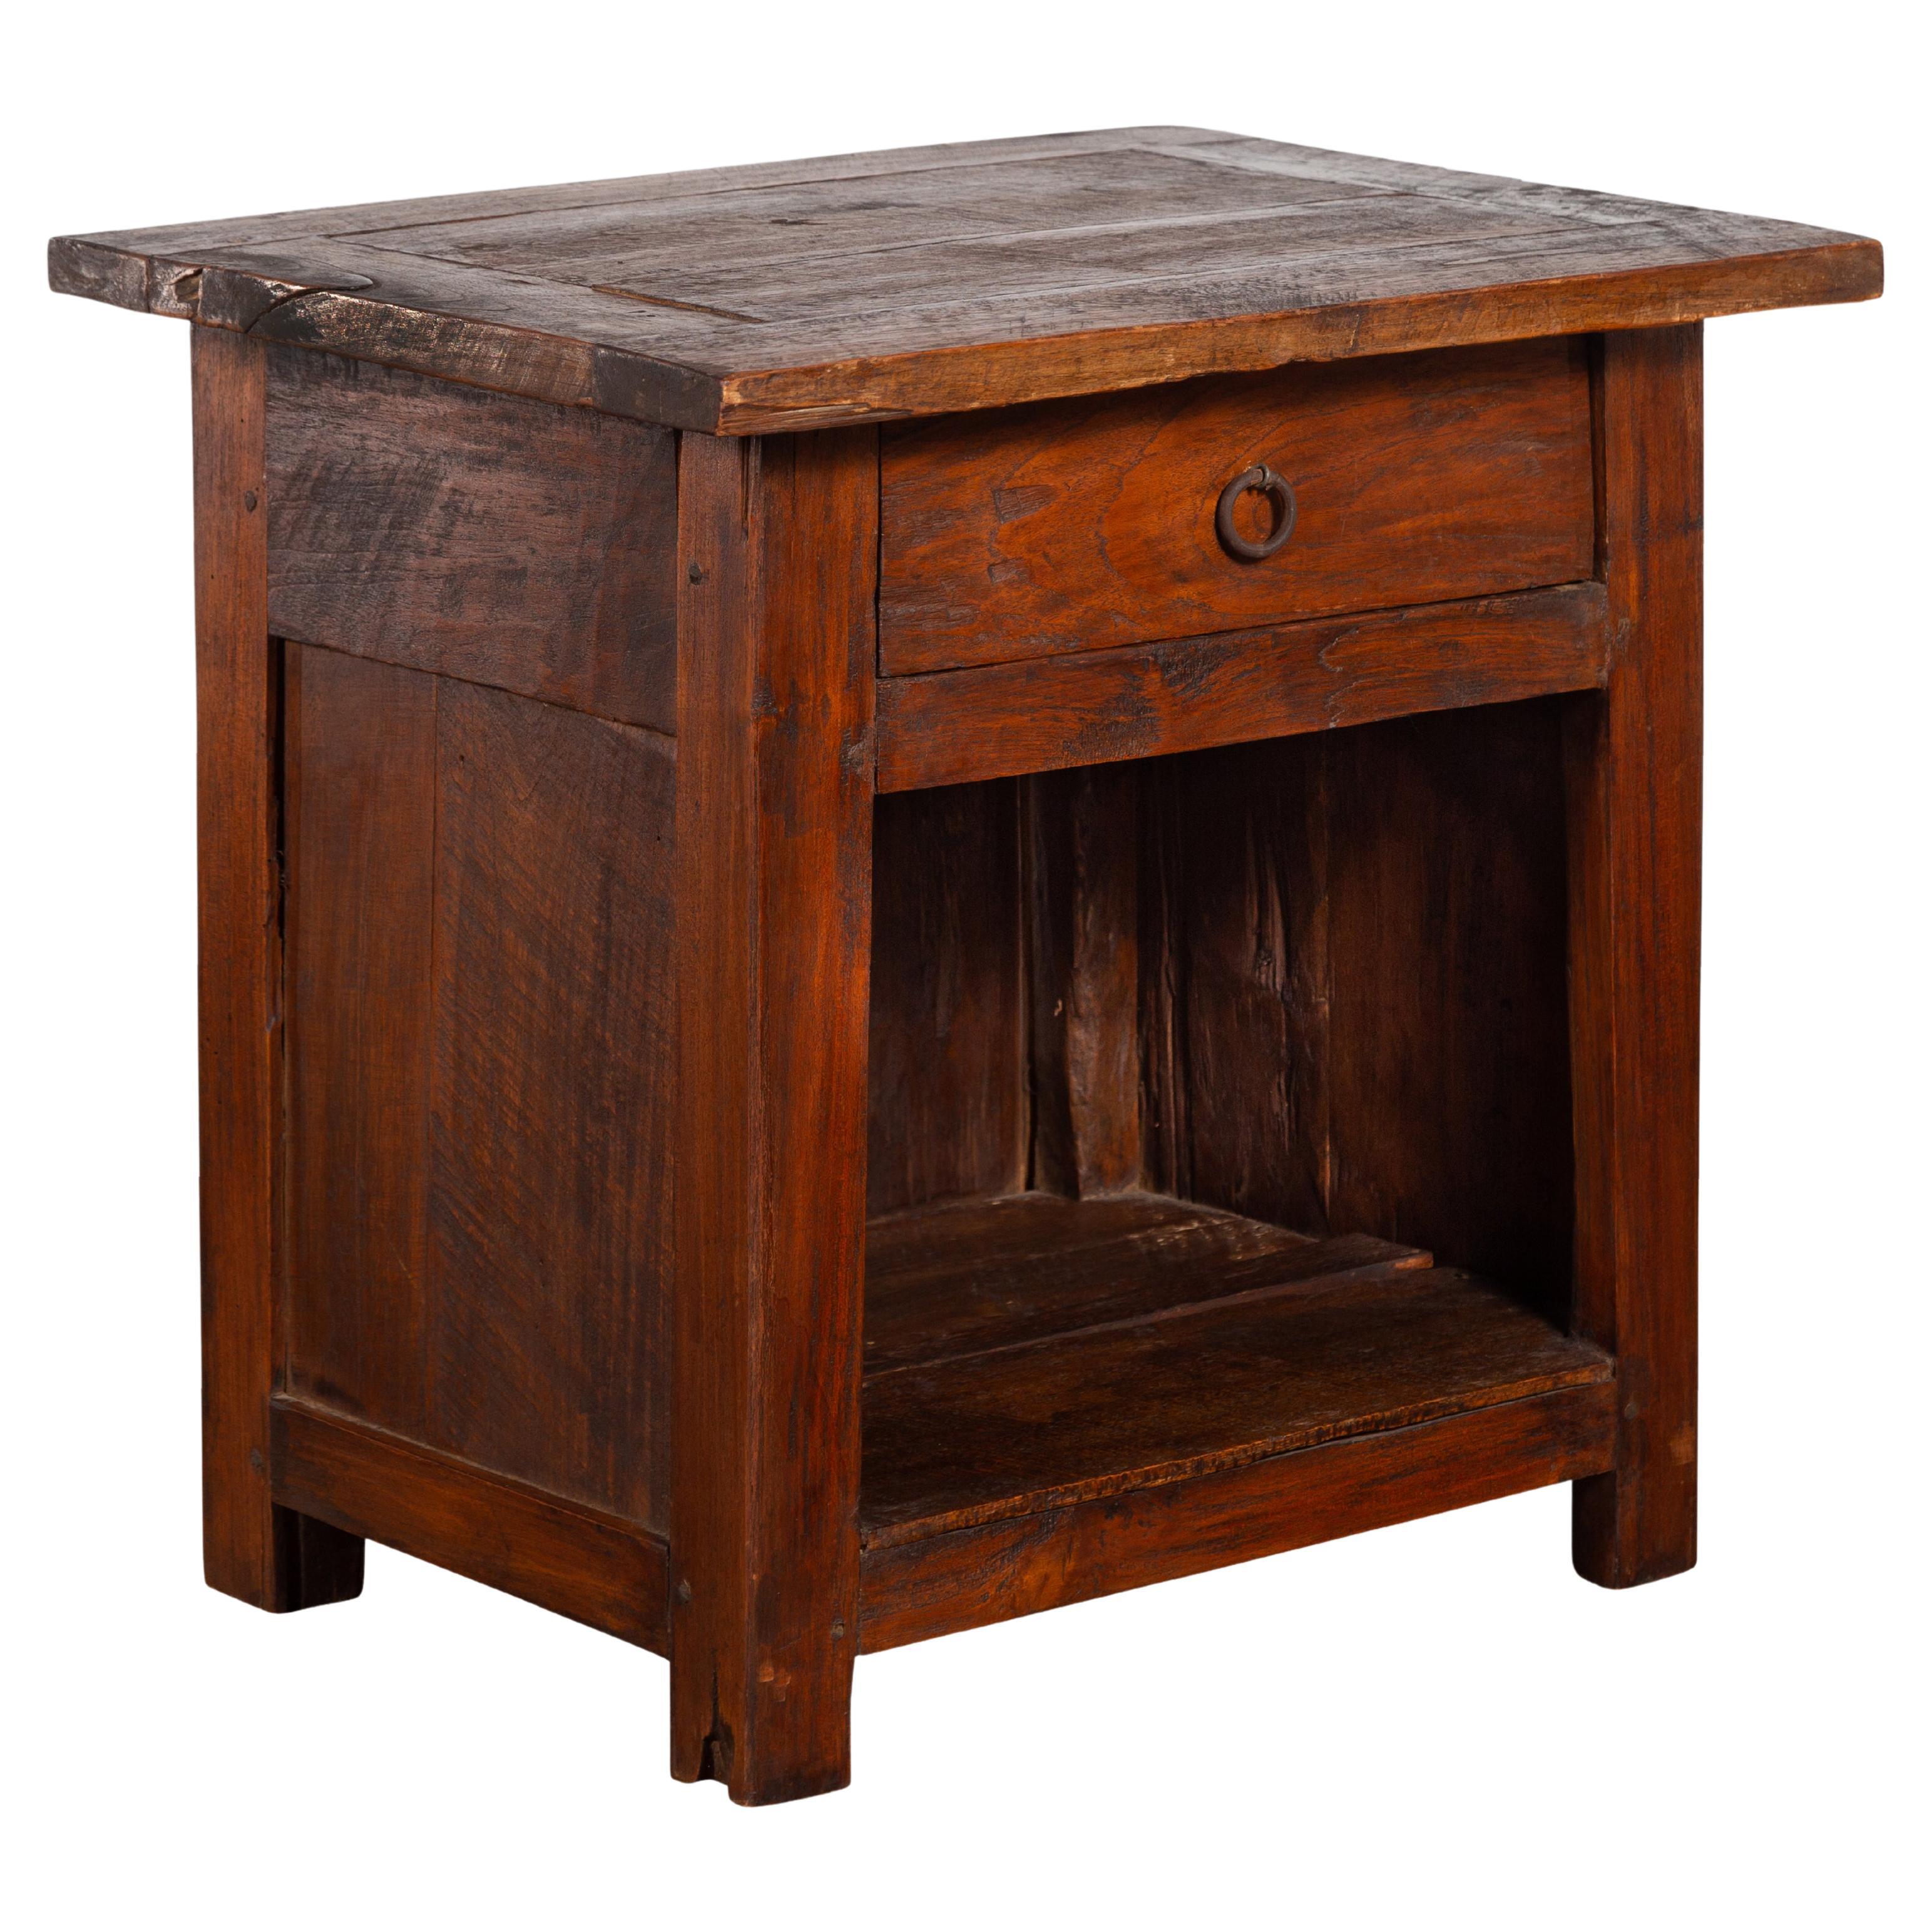 Javanese Early 20th Century Rustic Bedside Cabinet with Drawer and Open Shelf For Sale